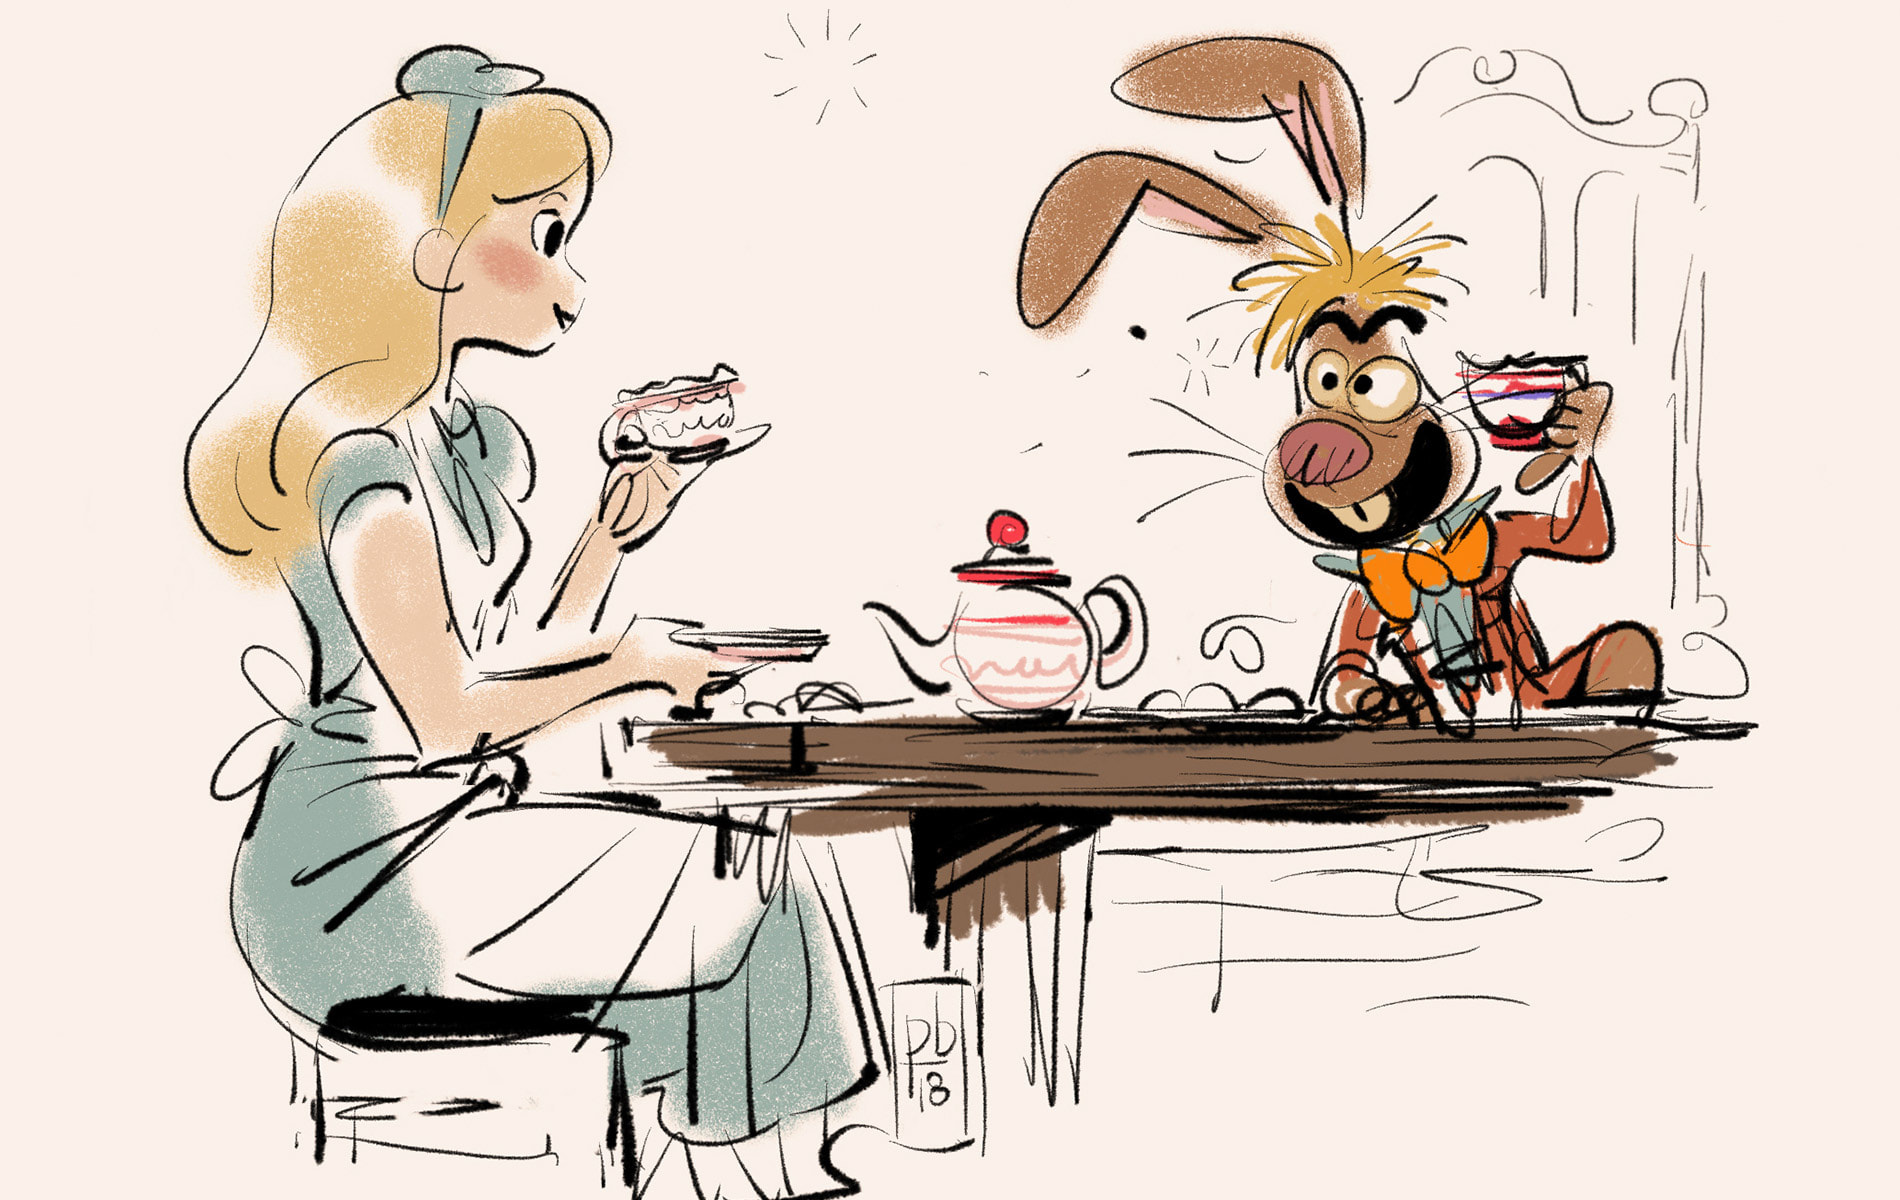 Paul Brigg's character studies of costumed figure drawing using Alice and the March Hare from Disney’s Alice in Wonderland